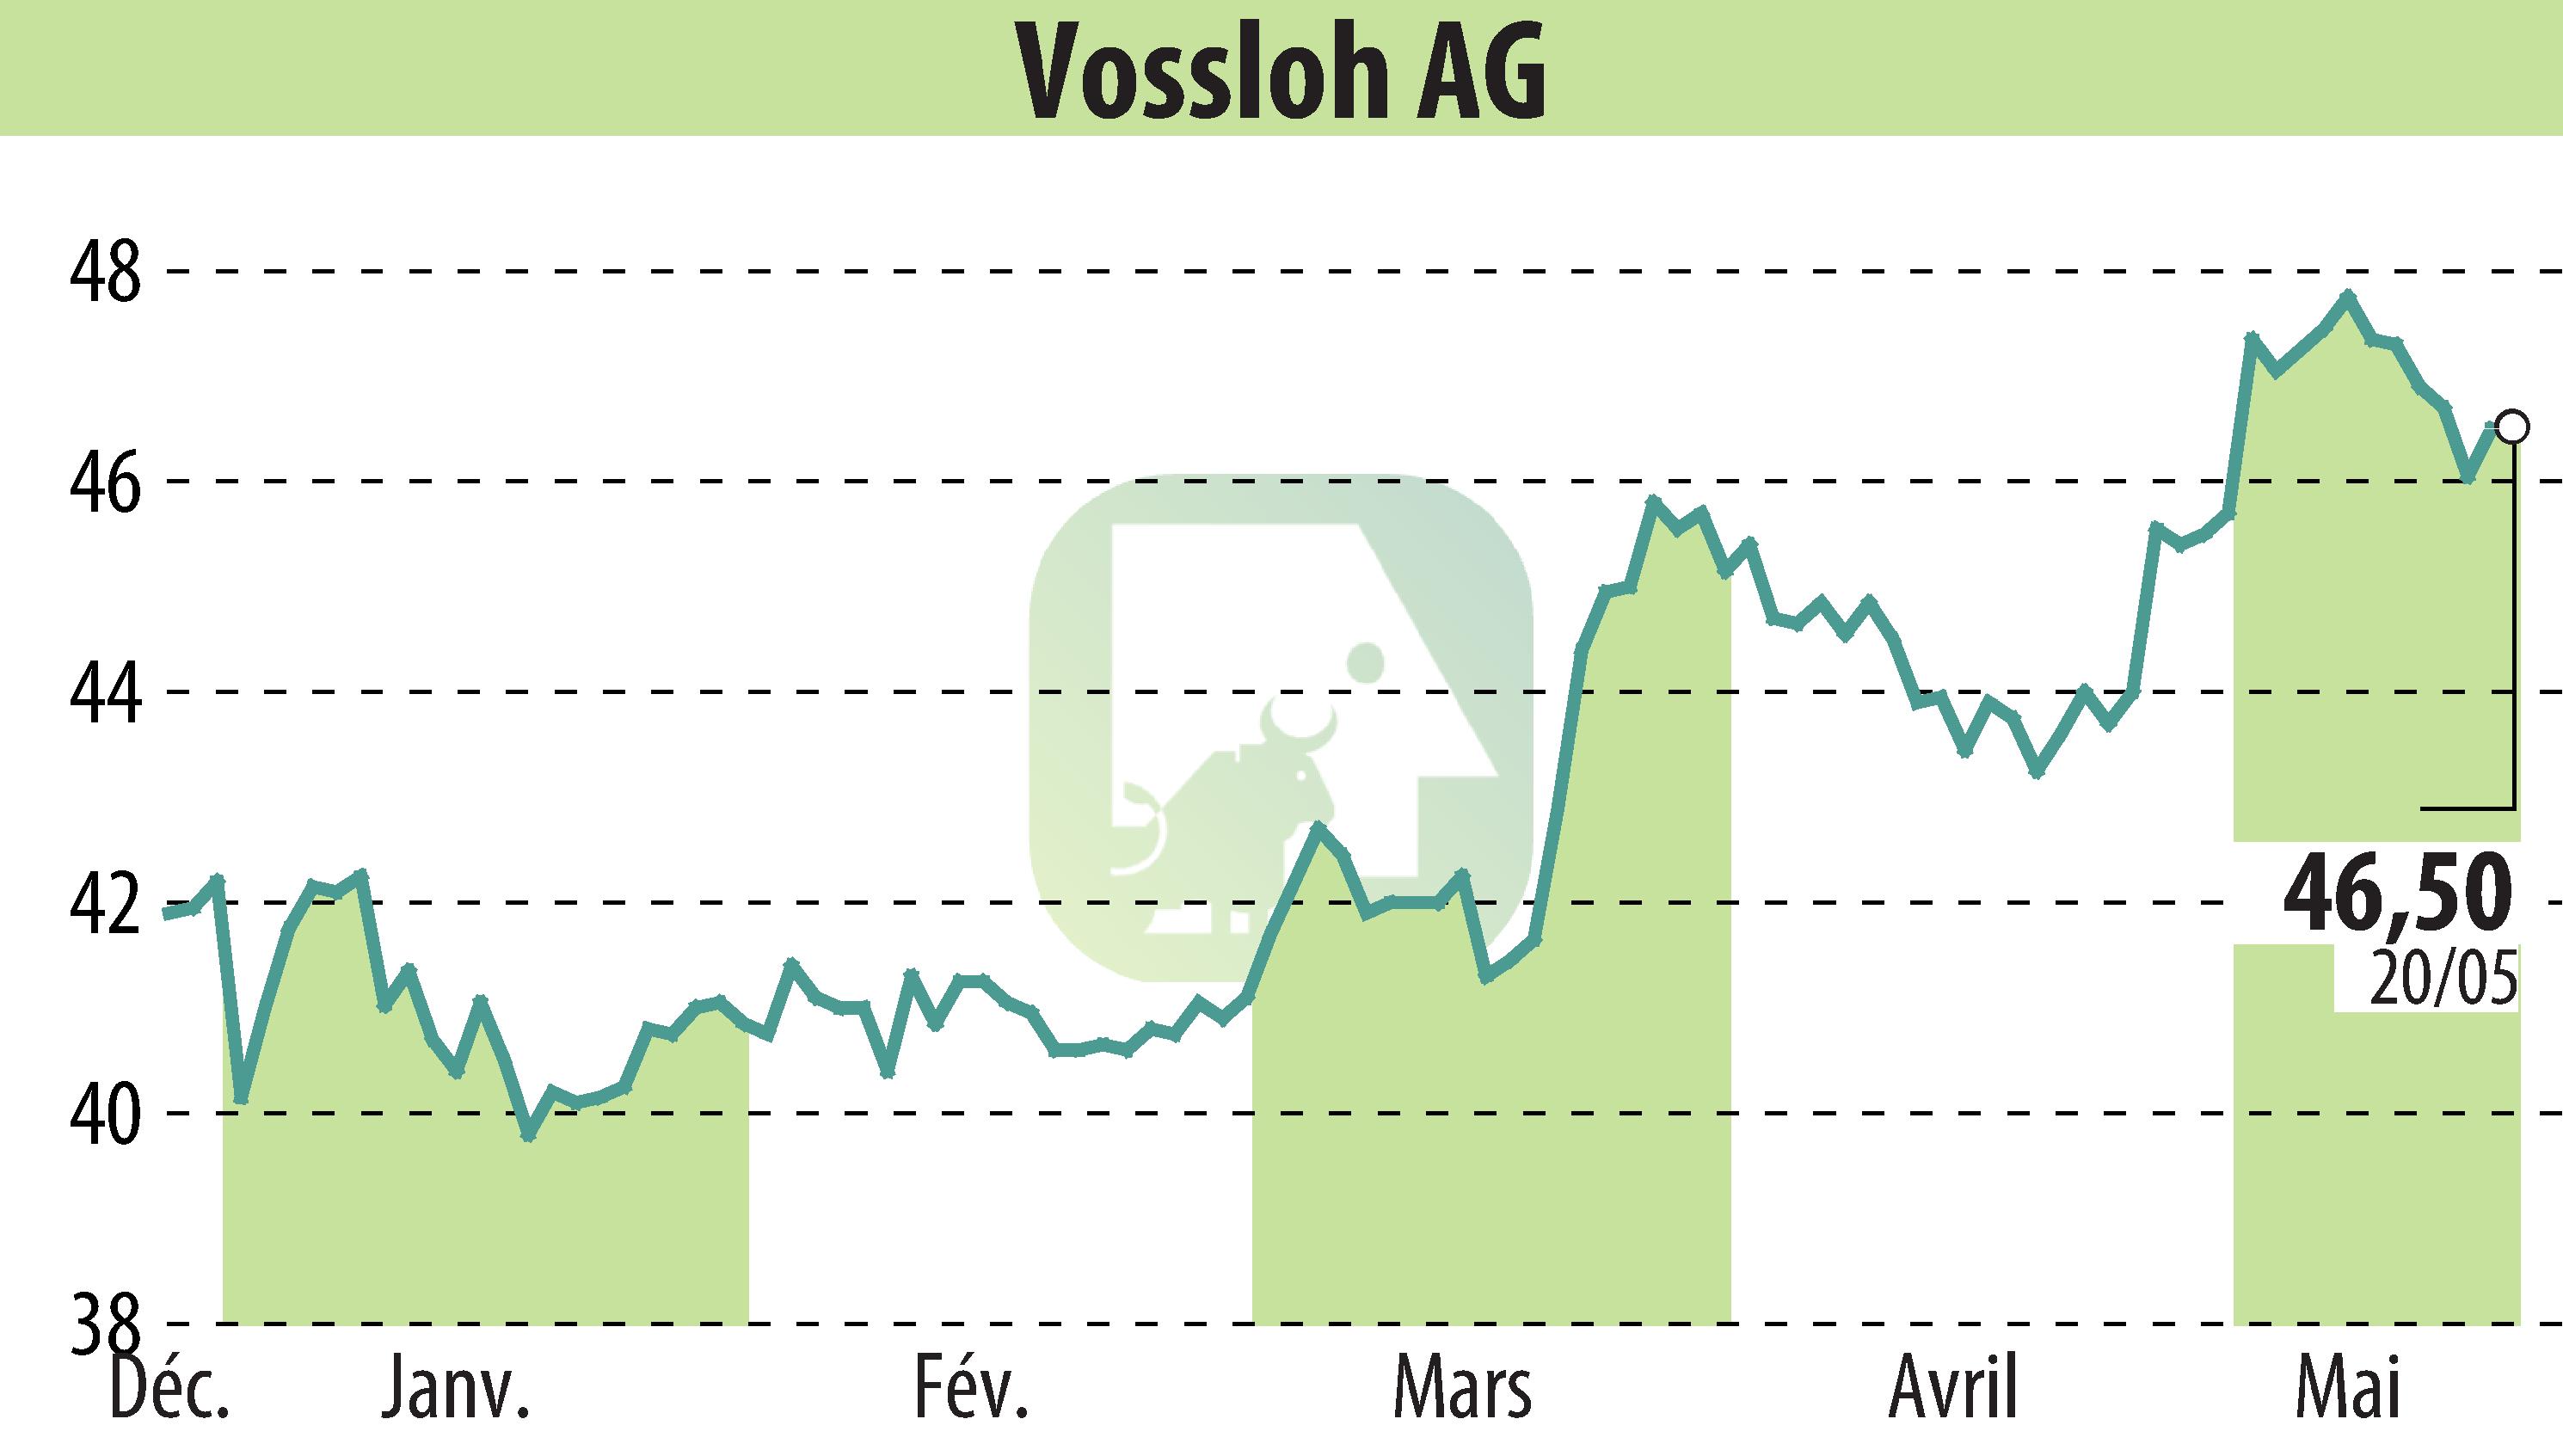 Stock price chart of Vossloh AG (EBR:VOS) showing fluctuations.